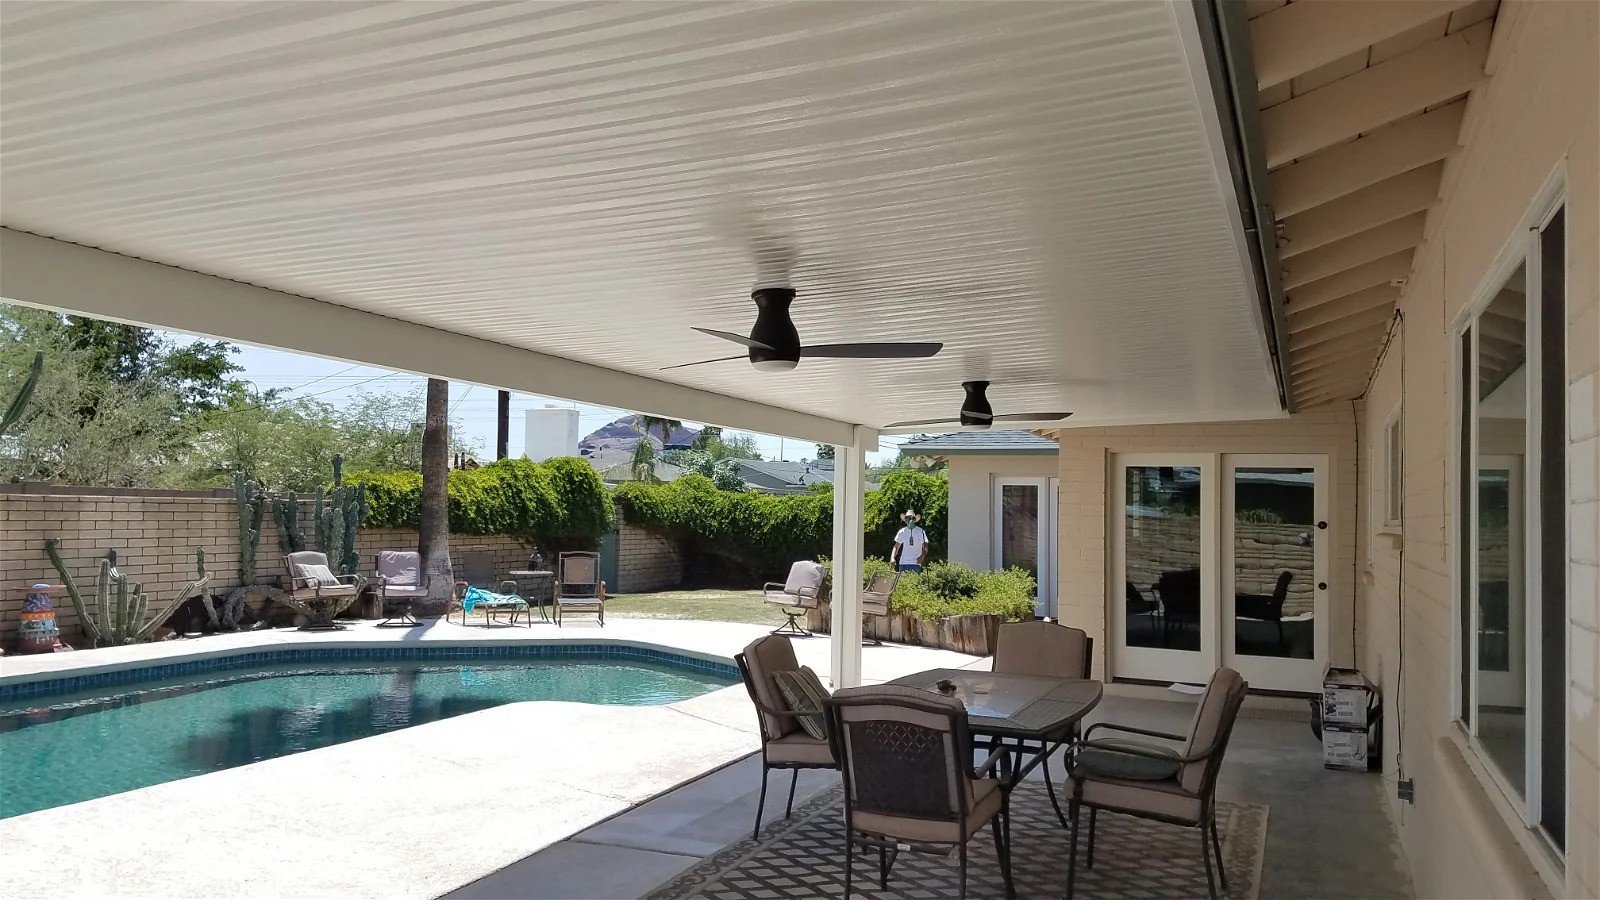 How to Install a Ceiling Fan on a Patio Cover